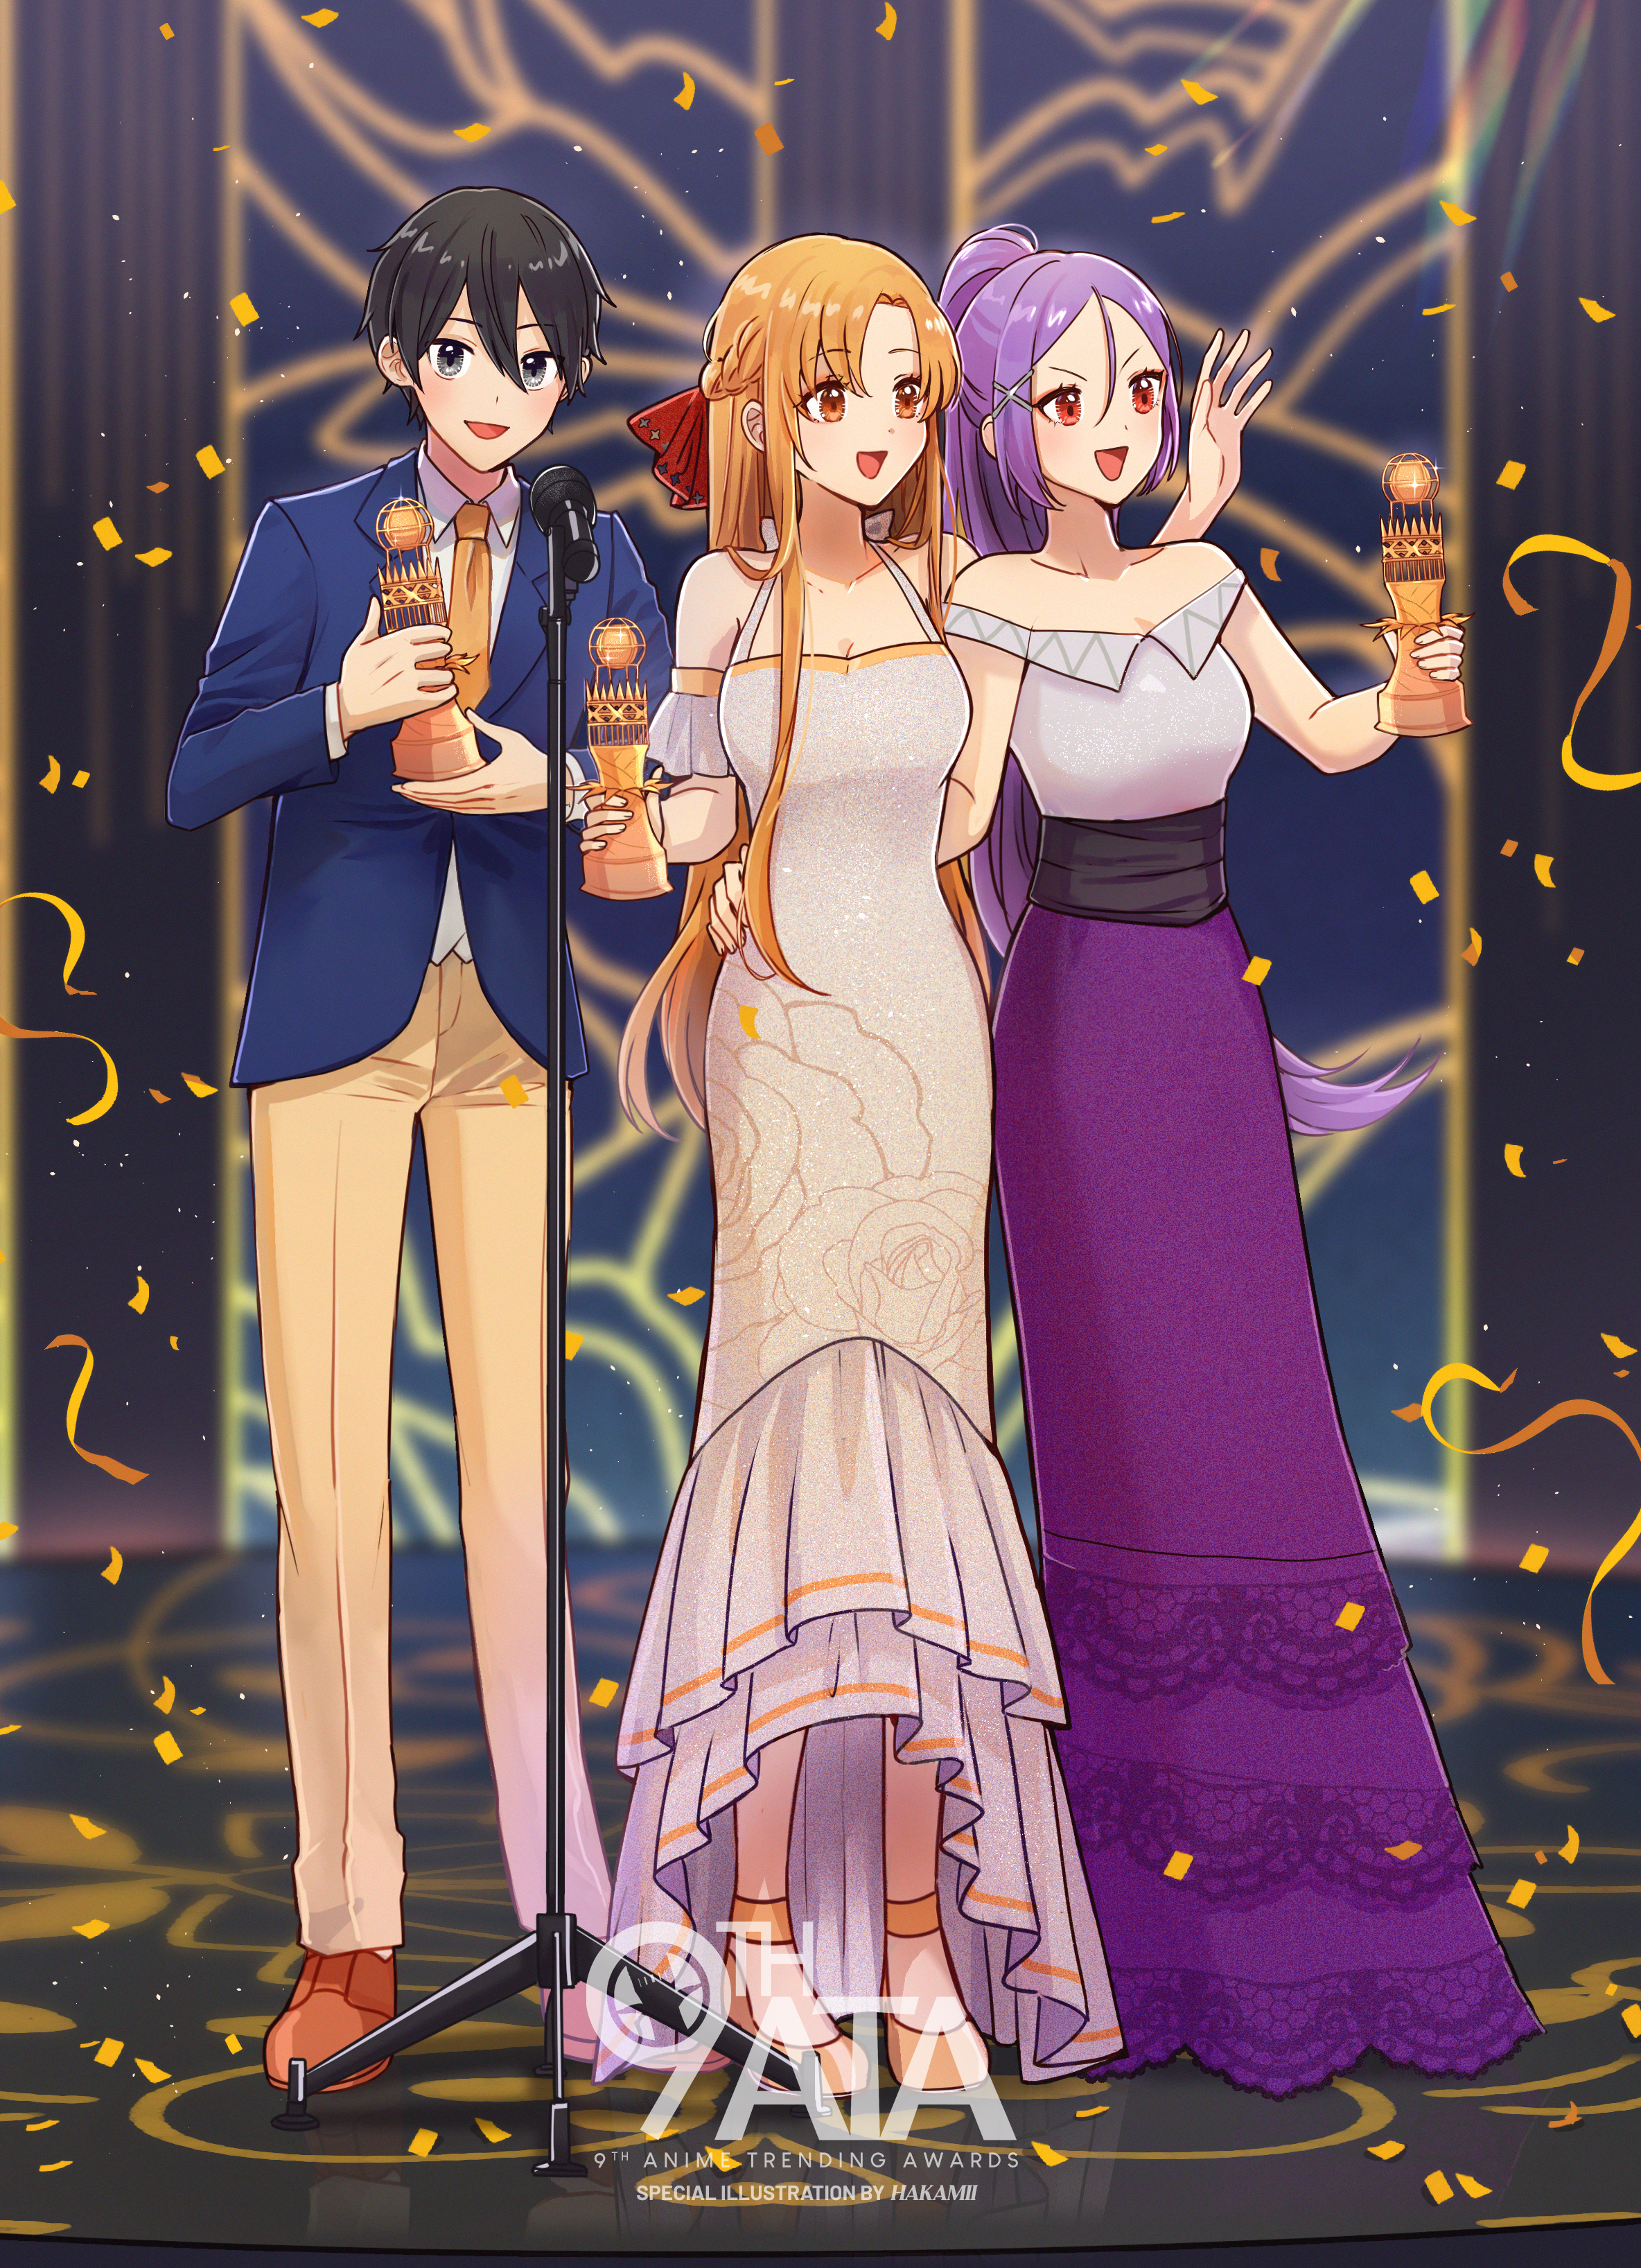 Sword Art Online wins Anime Movie of the Year 2022, finally scoring its first major annual award at Anime Trending